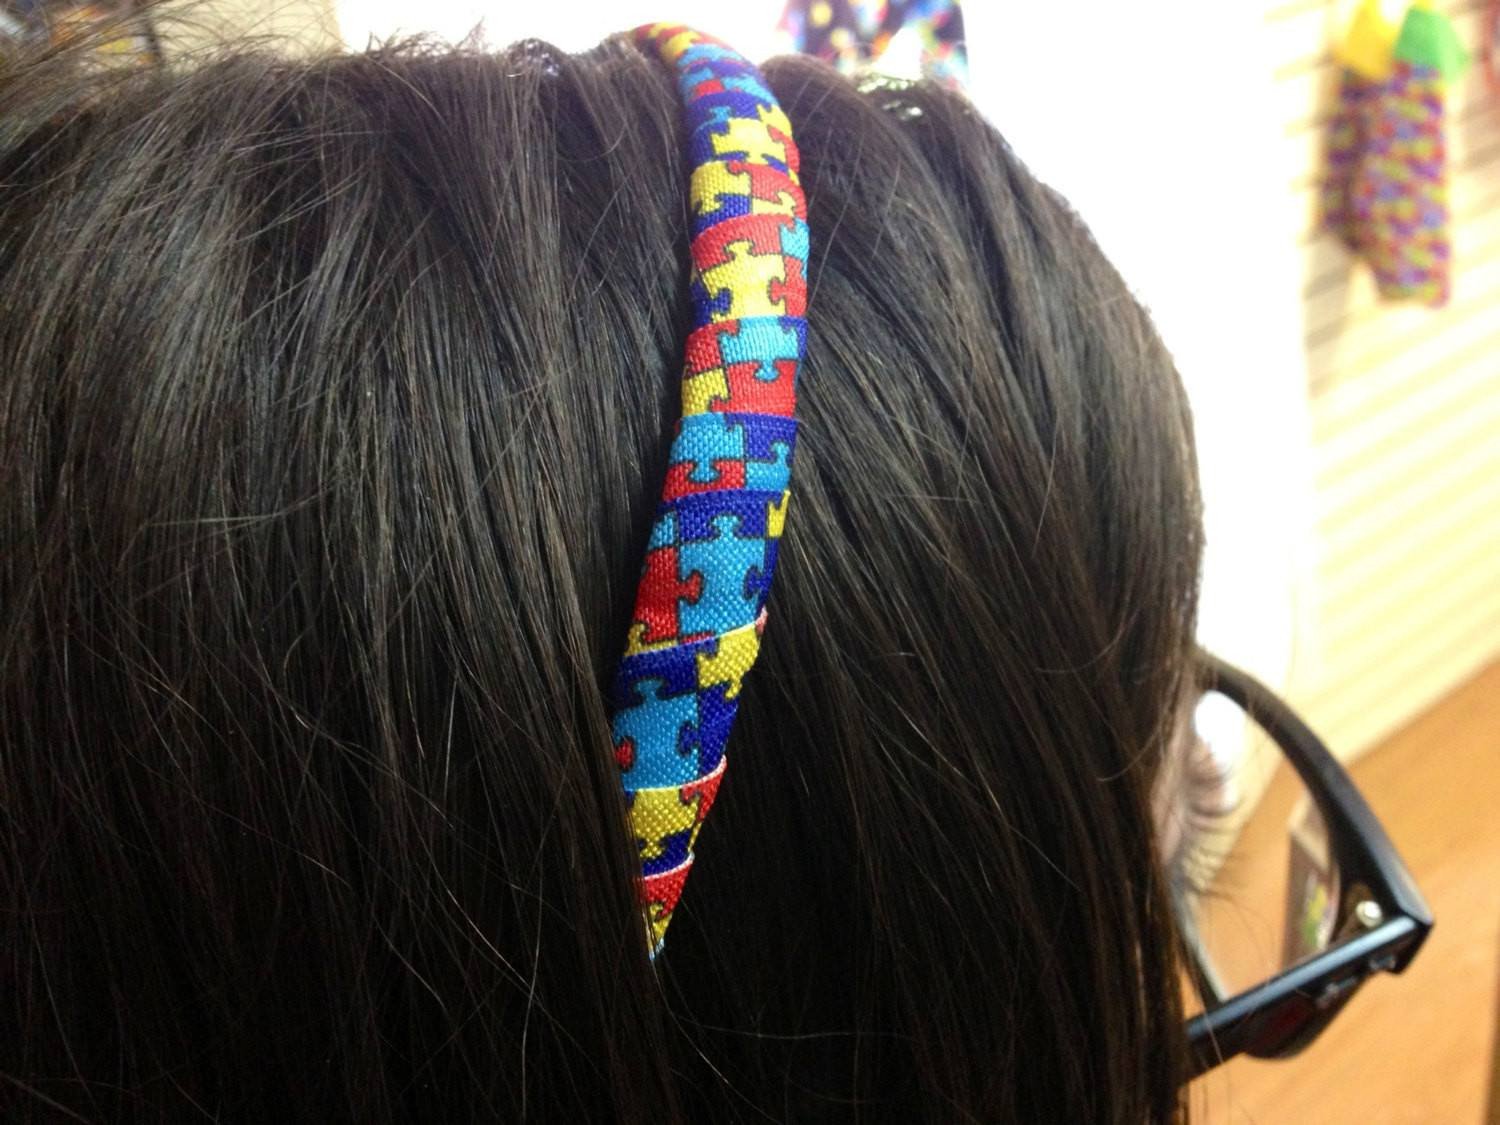 Colorful Autism Awareness hairband headband.  Puzzle piece headband. The Missing Piece Puzzle Company